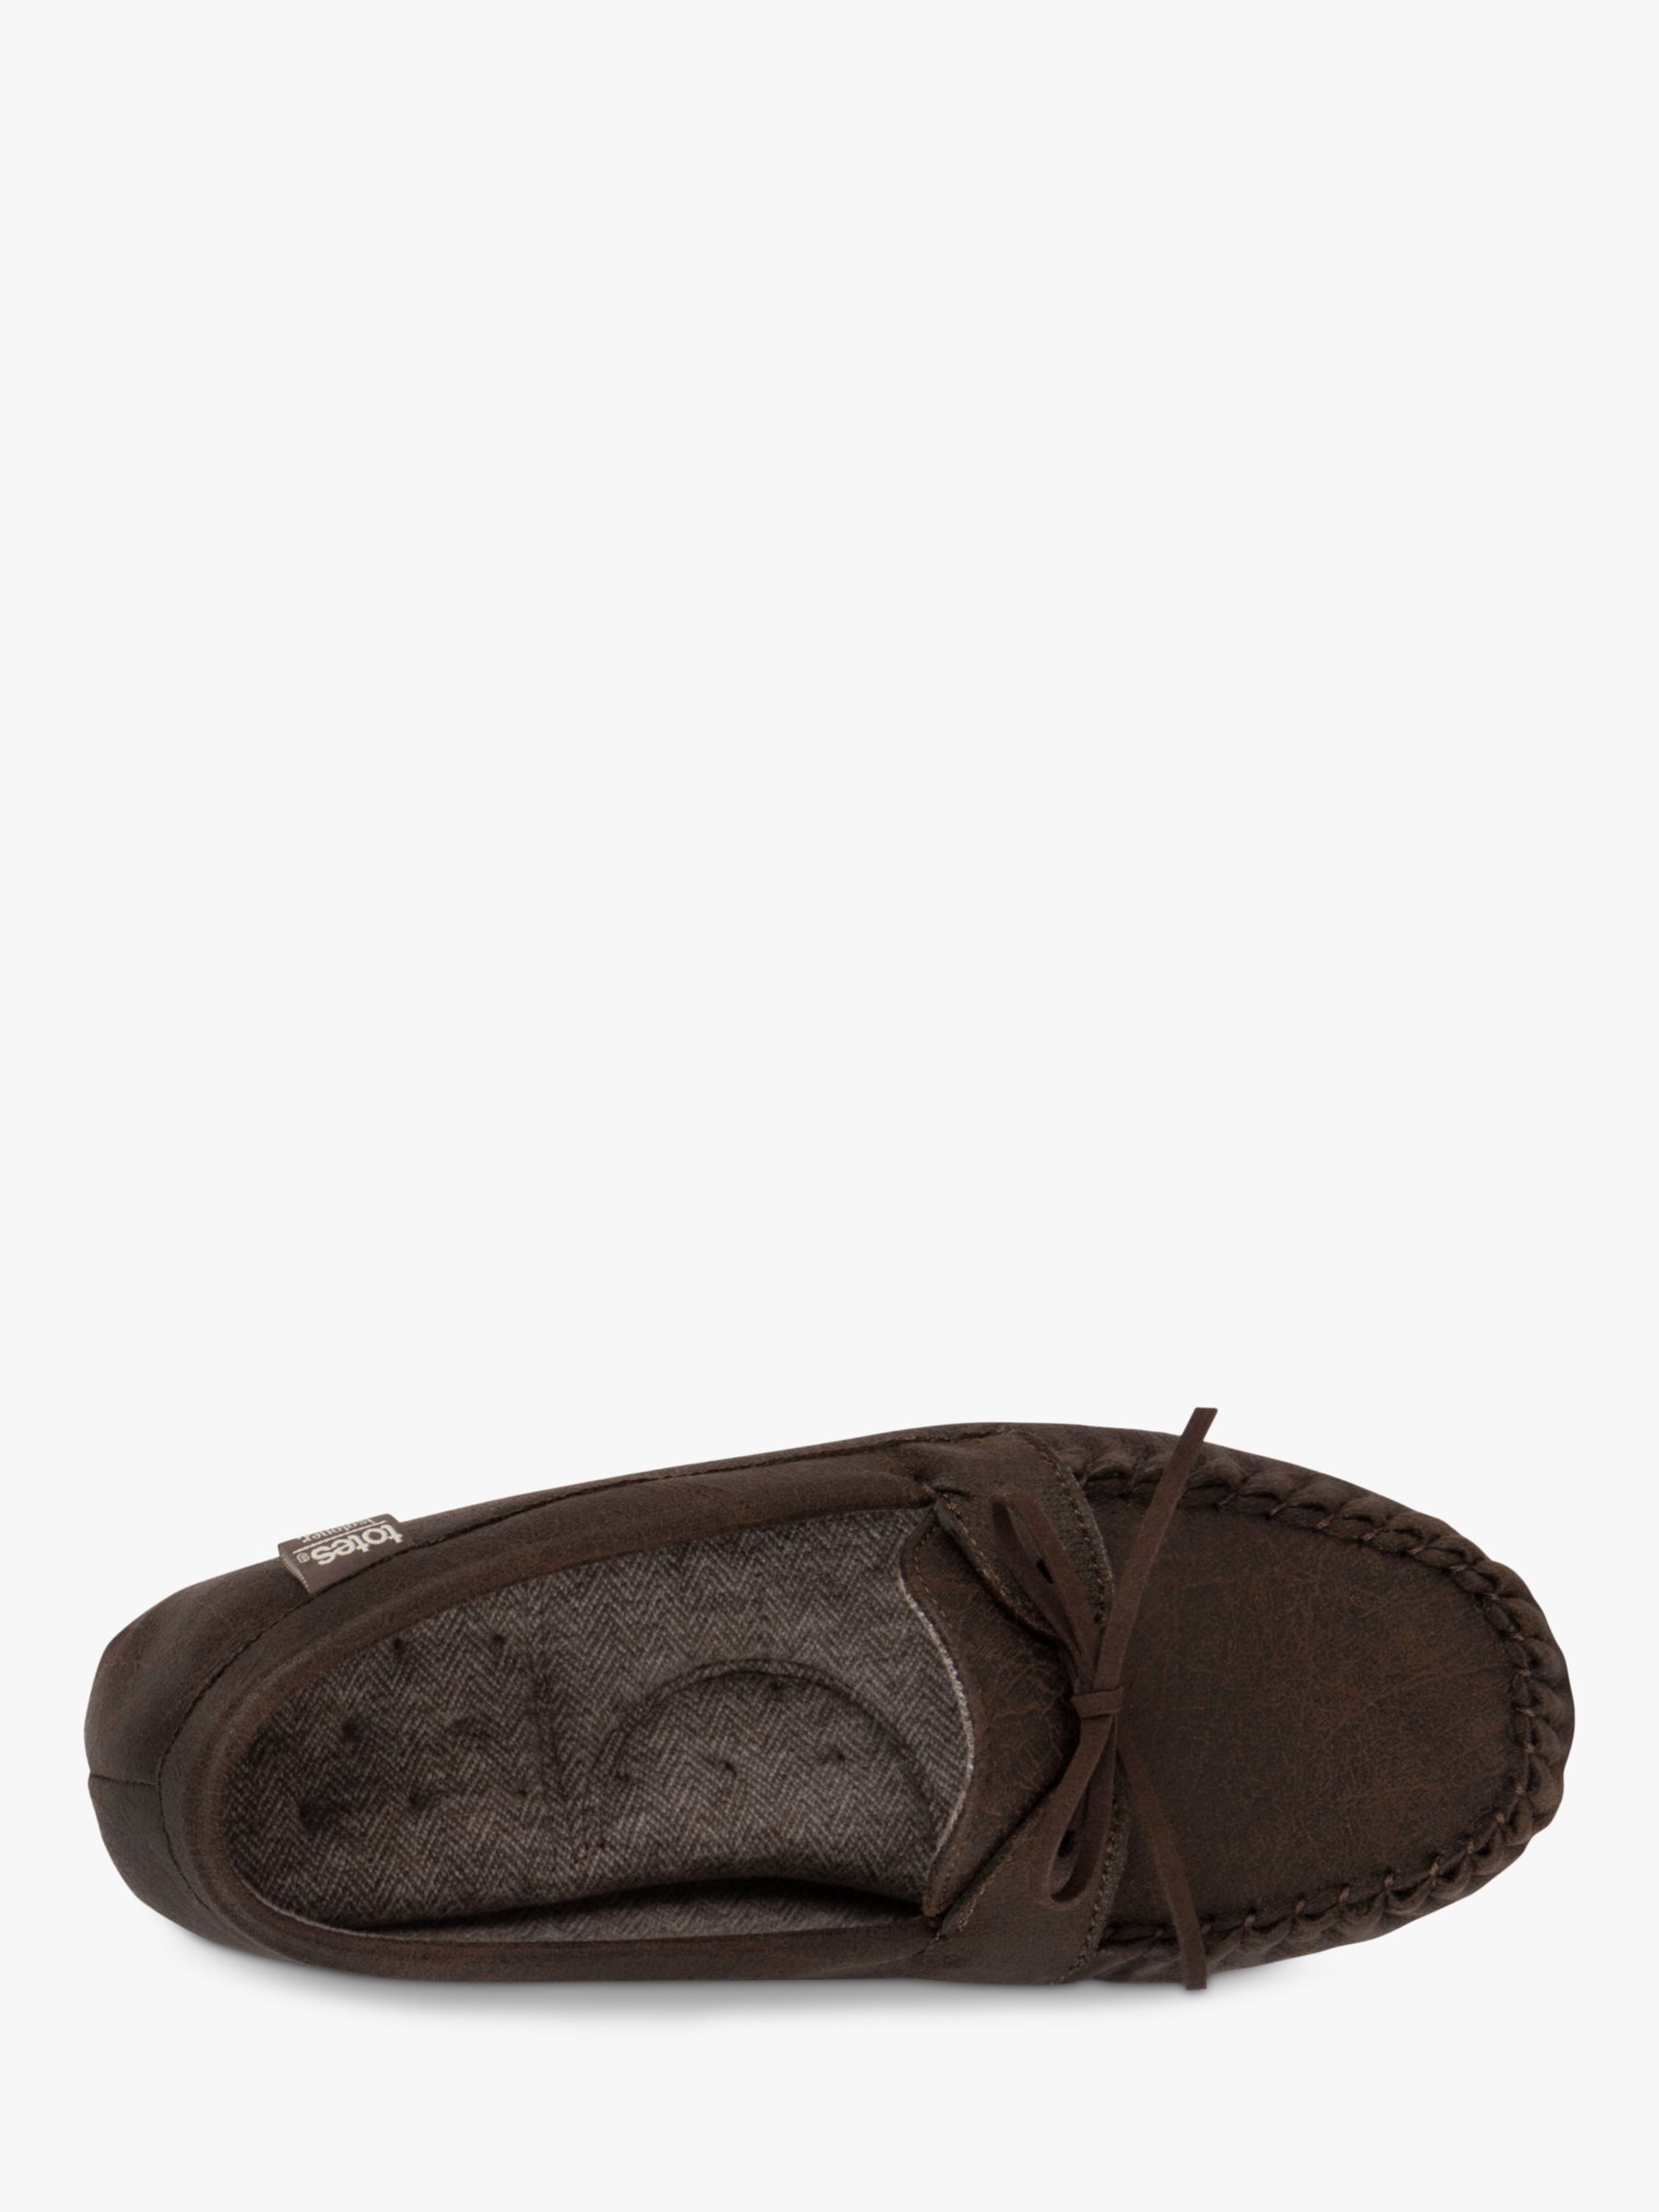 Buy totes Distressed Moccasin Slippers, Brown Online at johnlewis.com